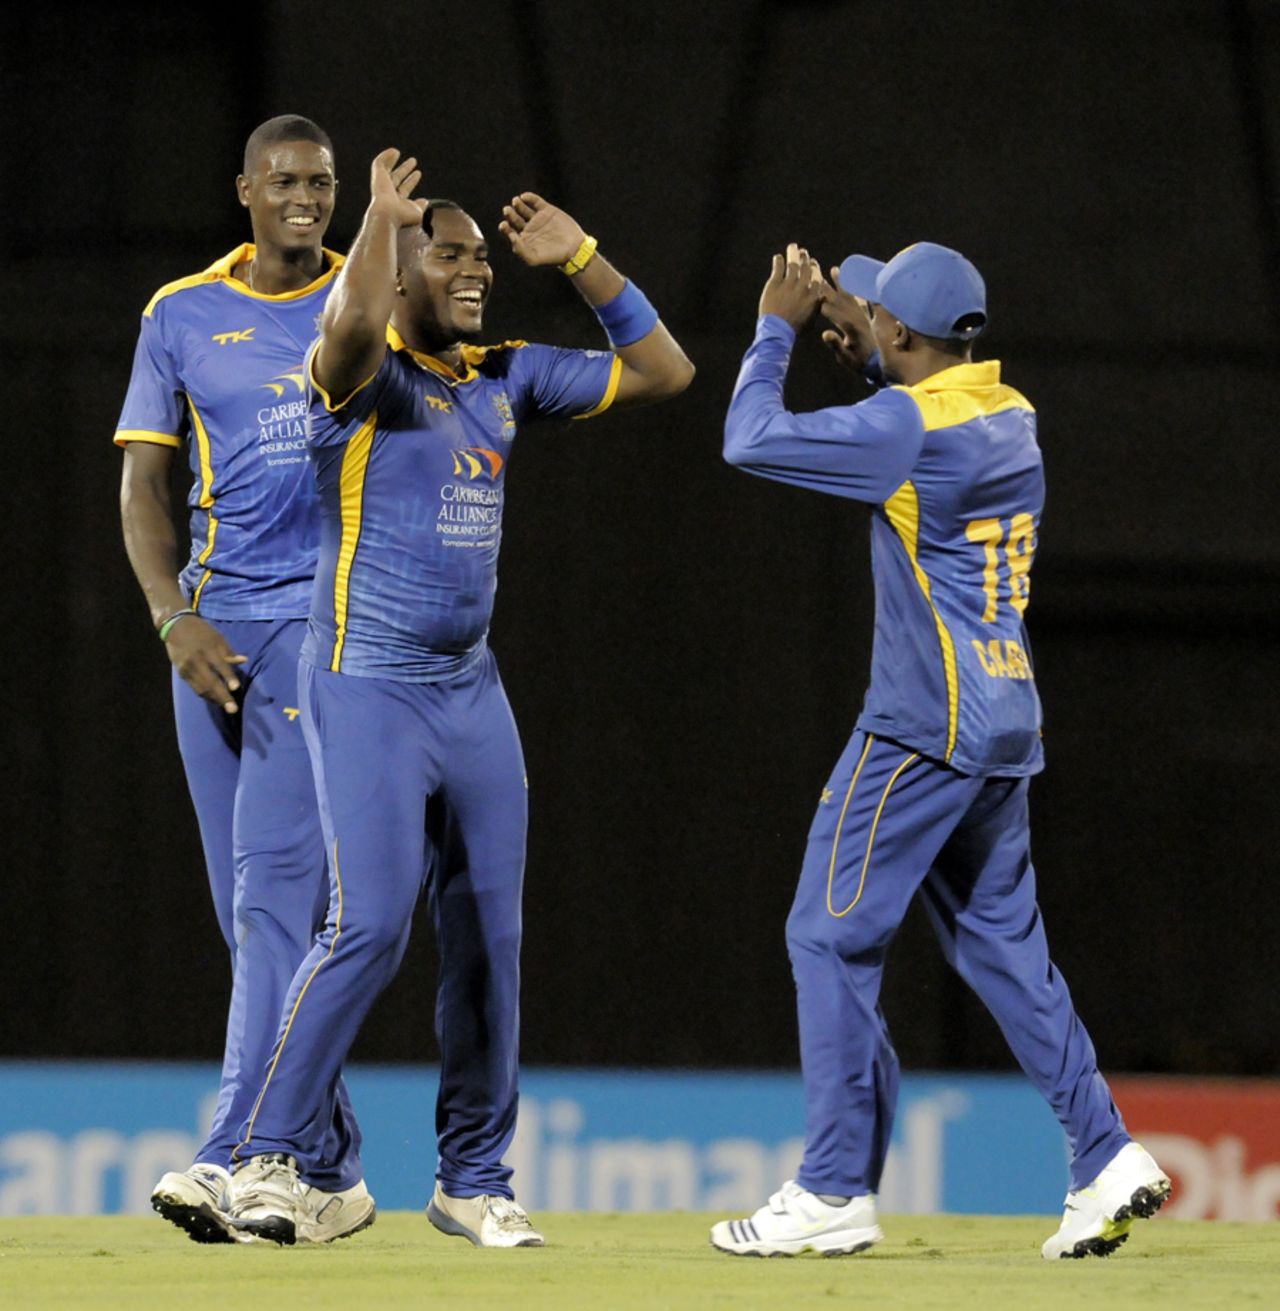 Barbados Tridents get together after one of Ashley Nurse's wickets, St Lucia Zouks v Barbados Tridents, Caribbean Premier League, St Lucia, August 8, 2013